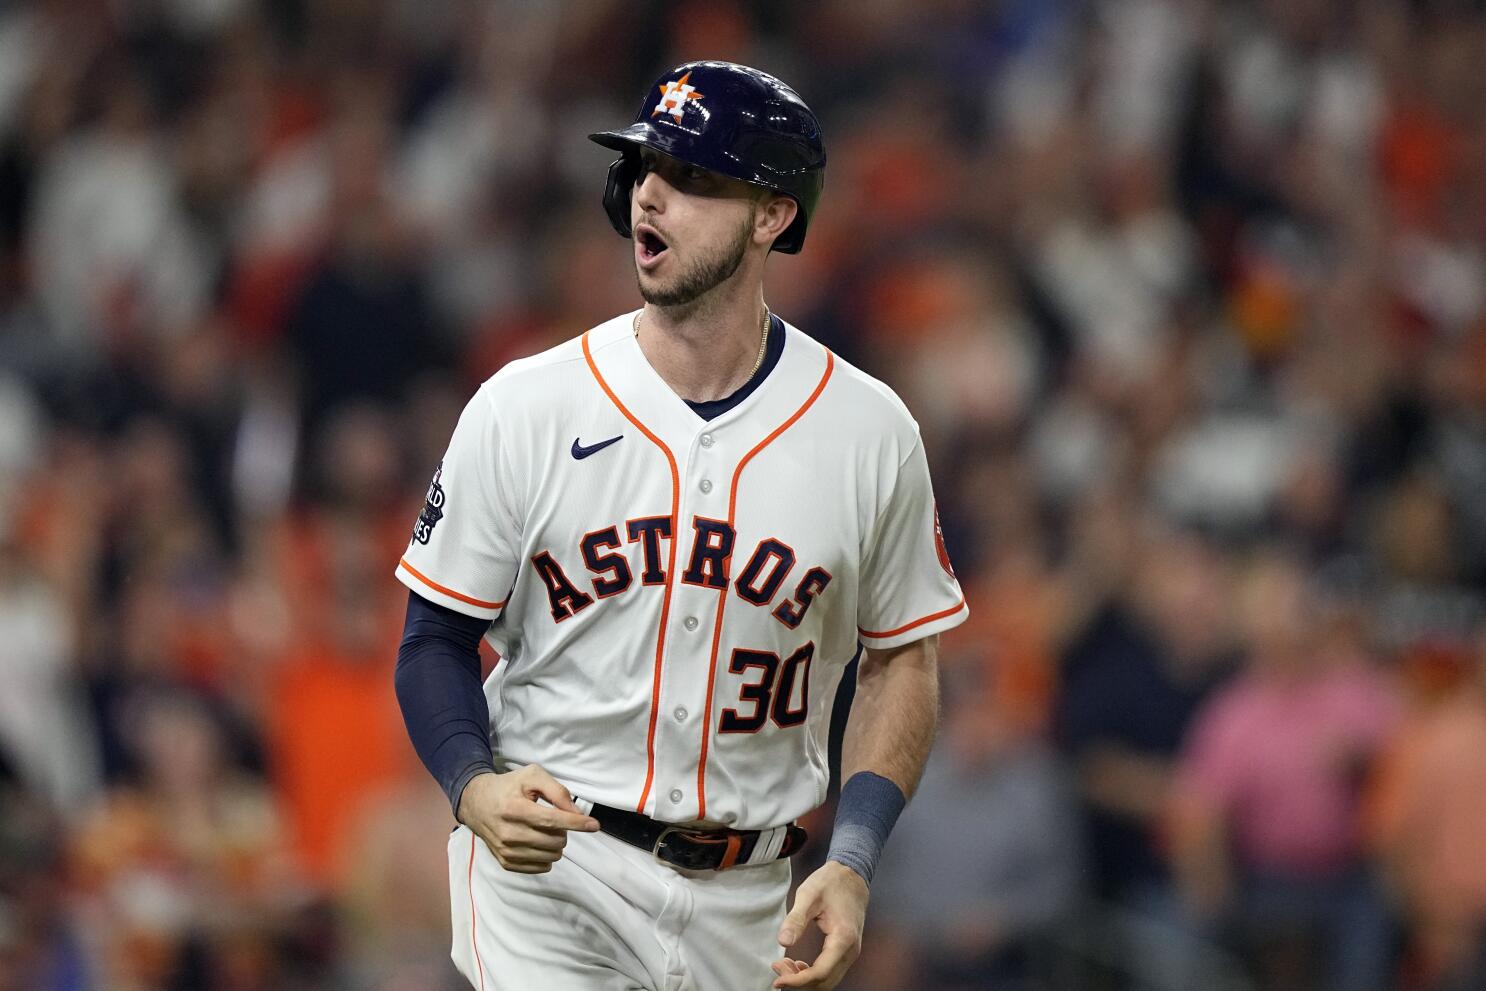 Houston Astros 2021 Year in Review: Outfielder Kyle Tucker